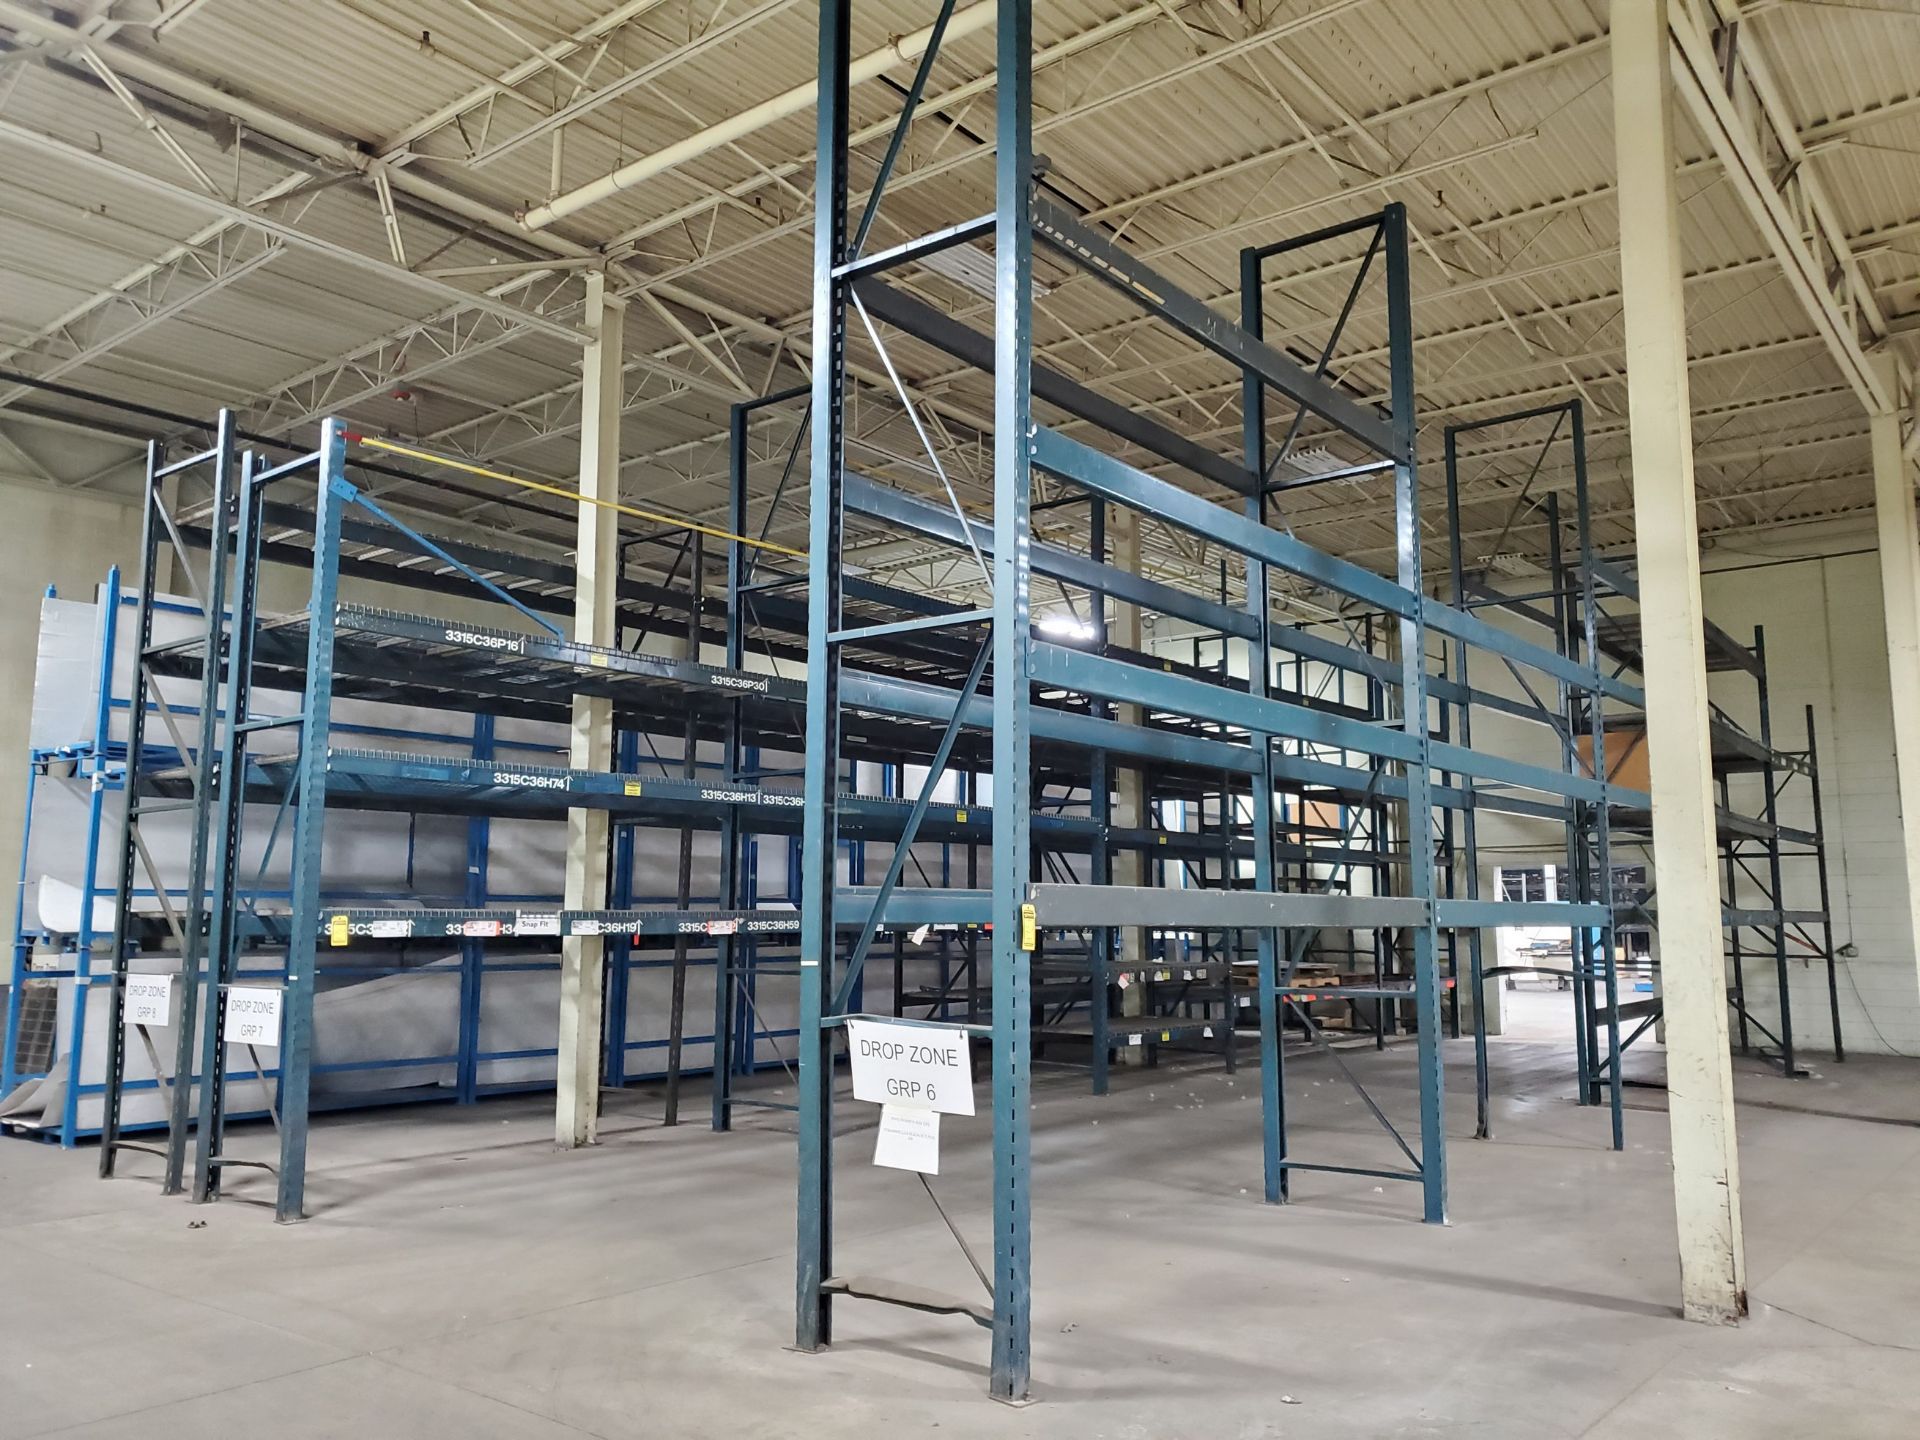 (15) SECTIONS OF ASSORTED SLOT/CORNER LOCK PALLET RACKING - VARIOUS SIZE HEIGHTS (12'-19') AND BEAMS